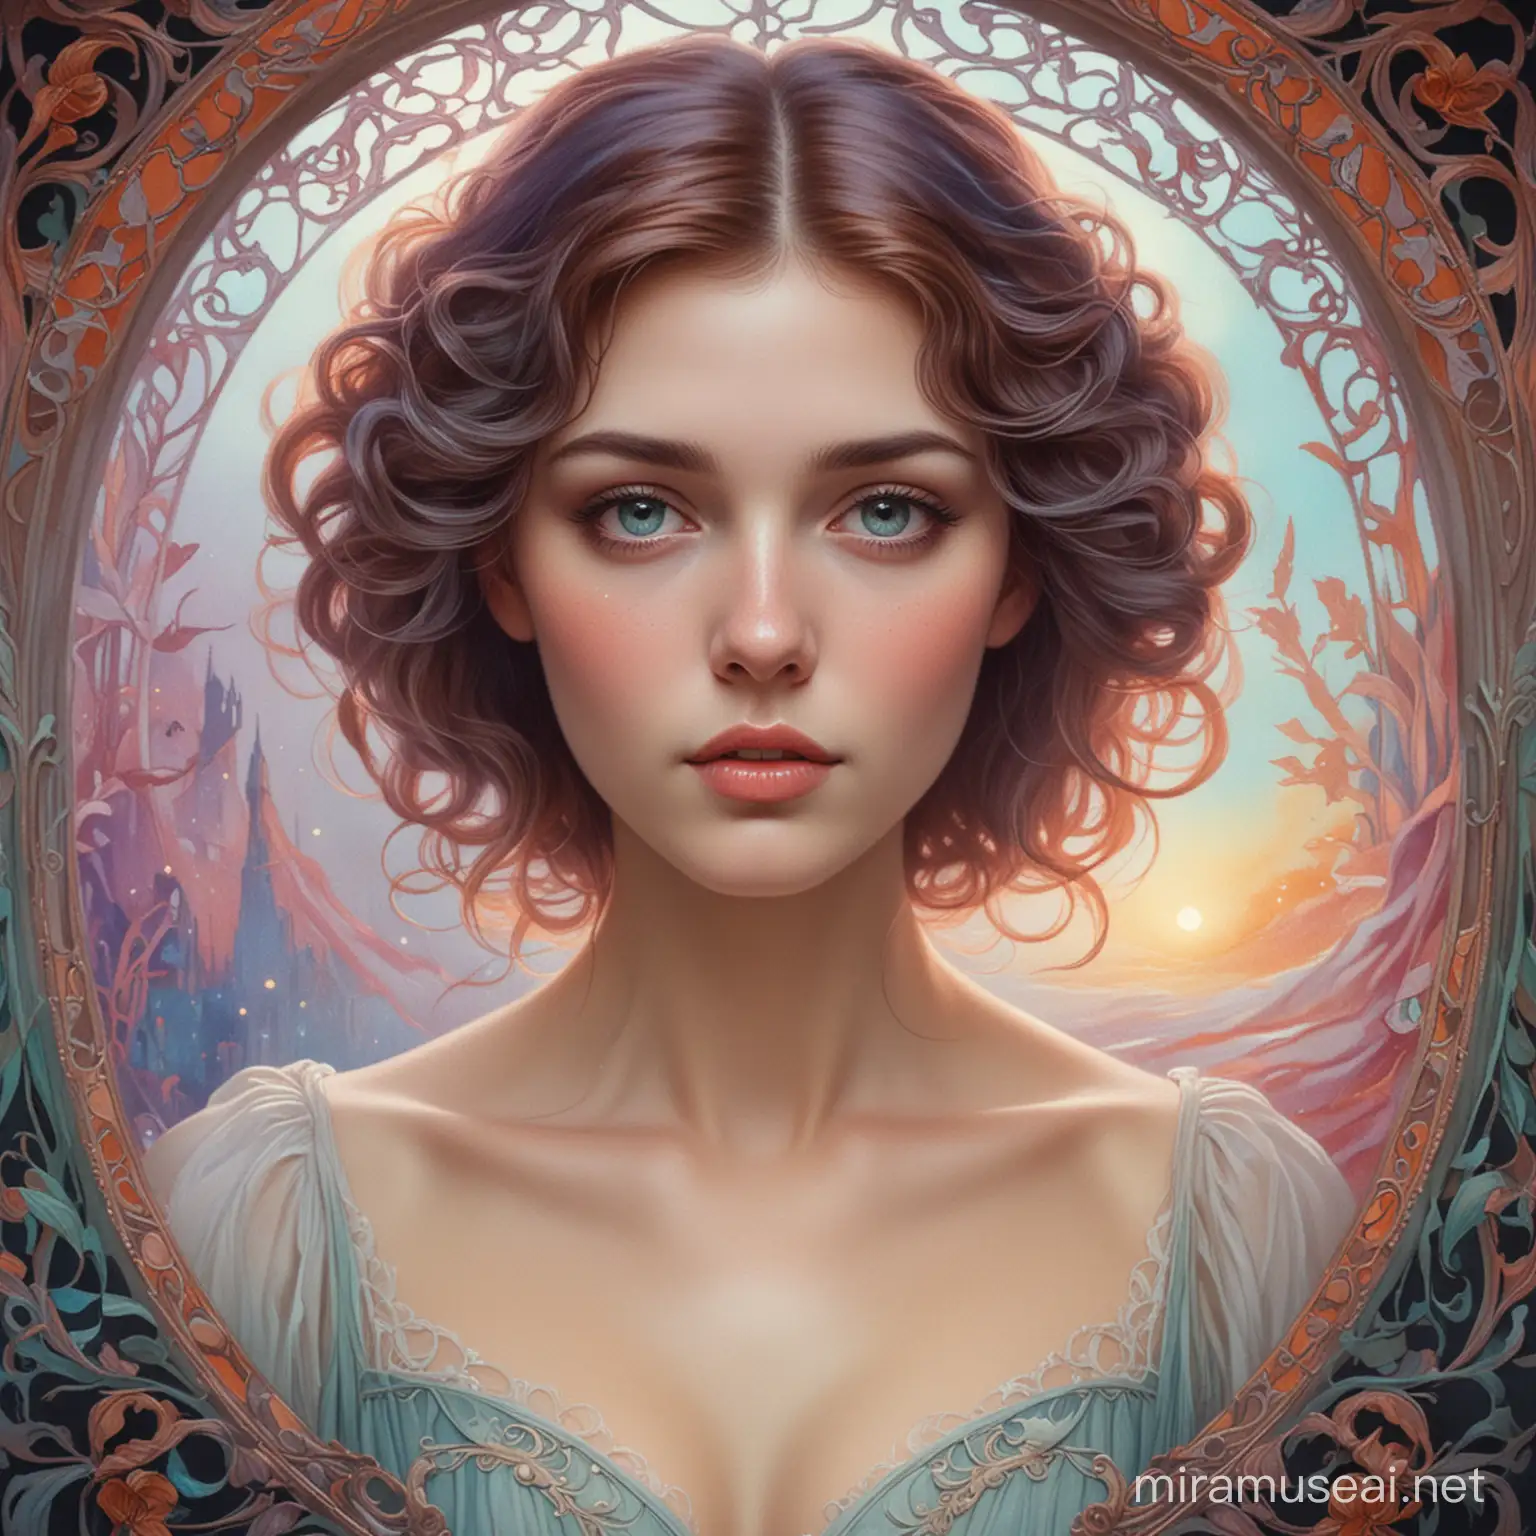 Ethereal Beauty Enchanting Woman in Art Nouveau Style